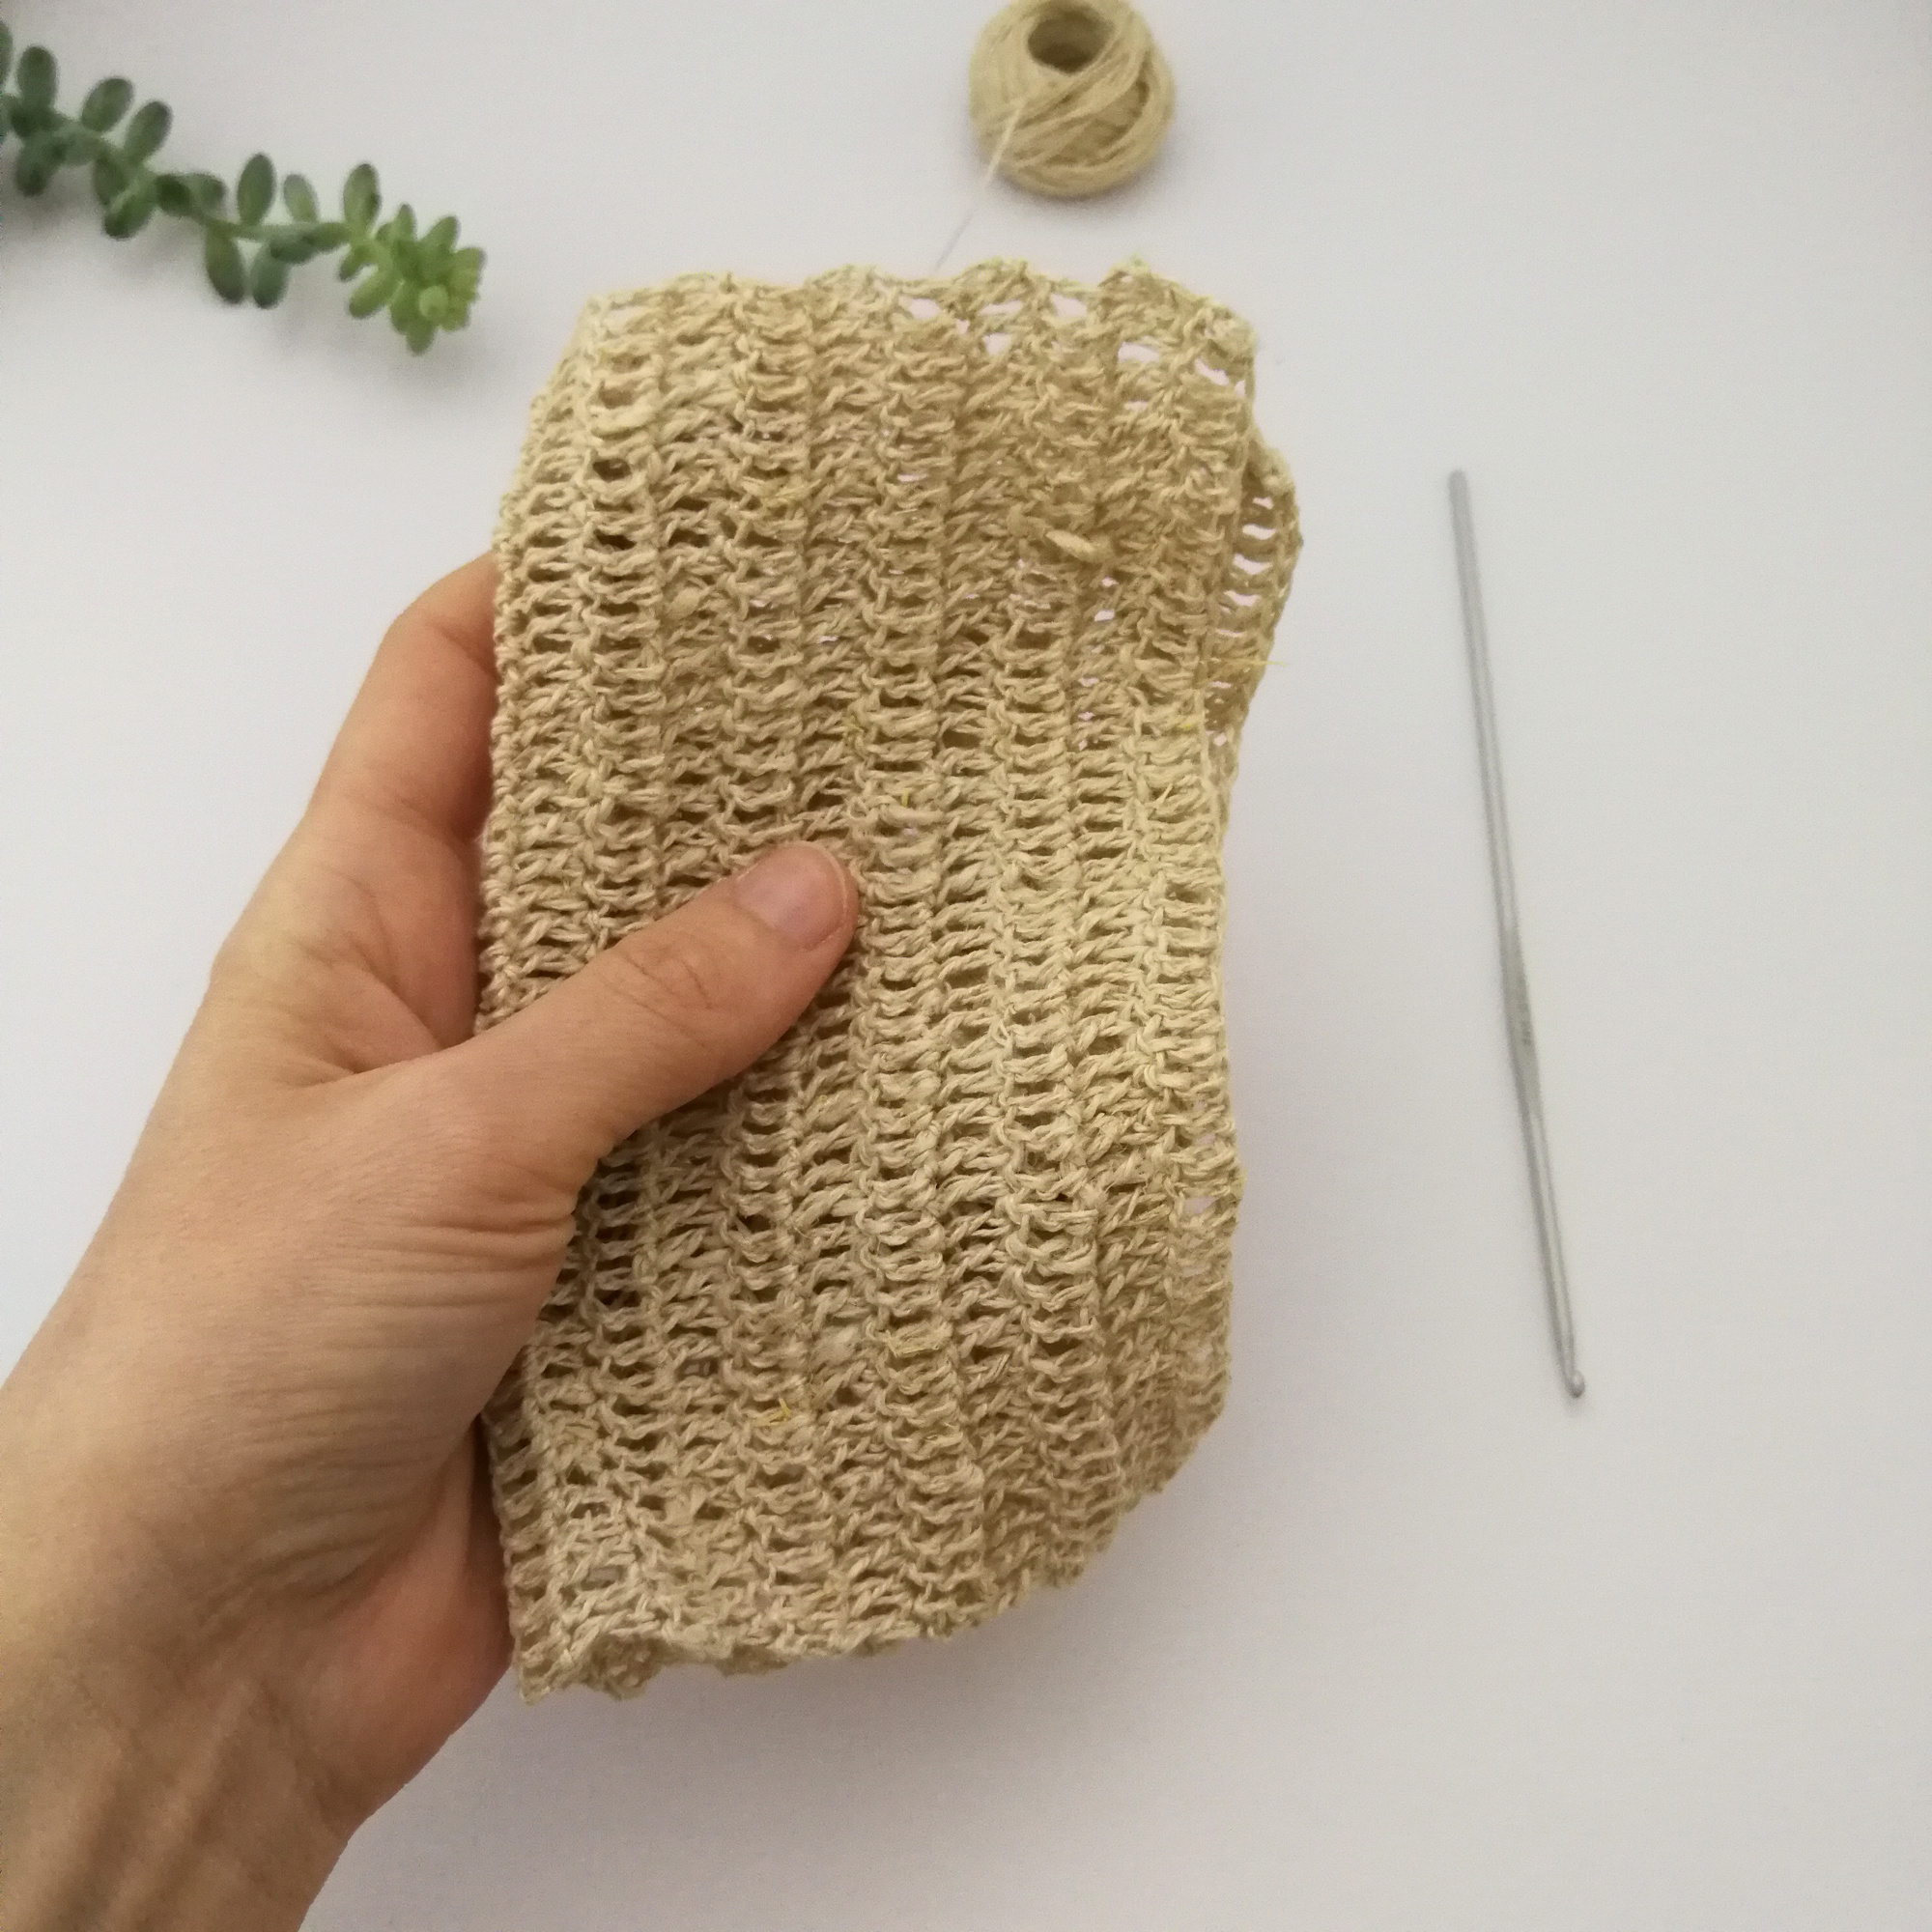 Crafting Eco-Friendly Dishcloths with byGoldenberry